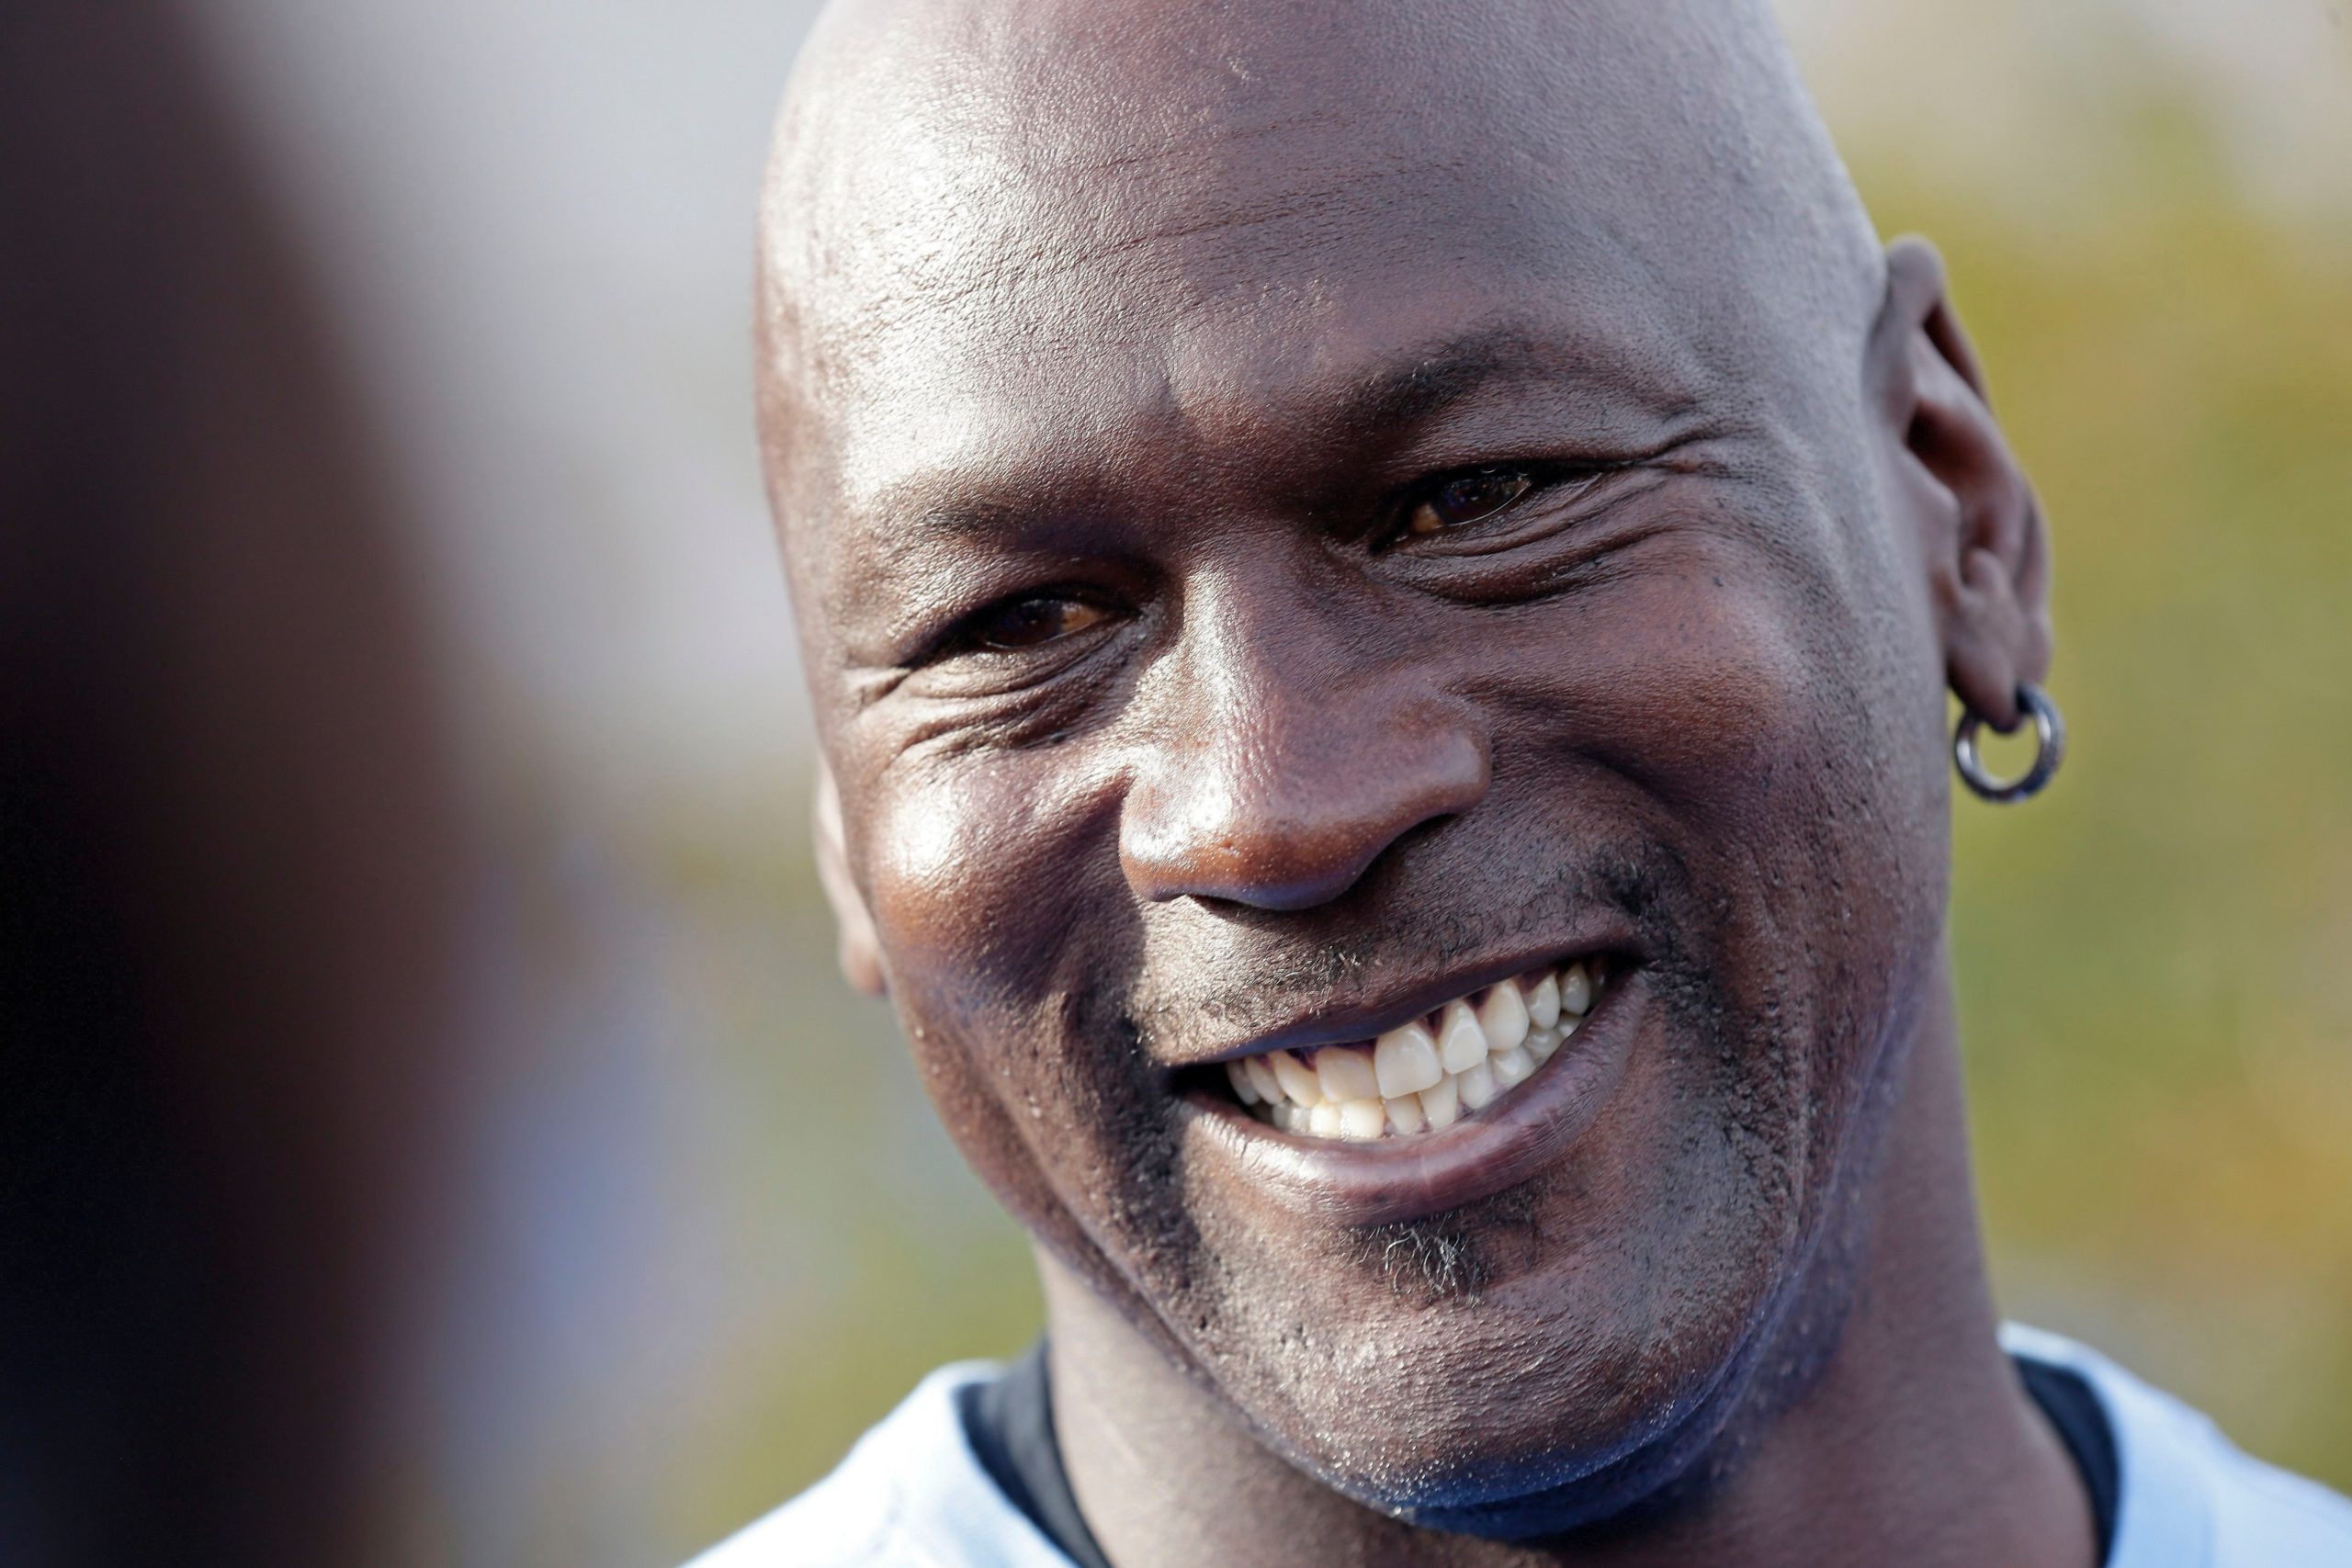 Michael Jordan Reveals he Wanted to Originally Partner With Adidas Over Nike